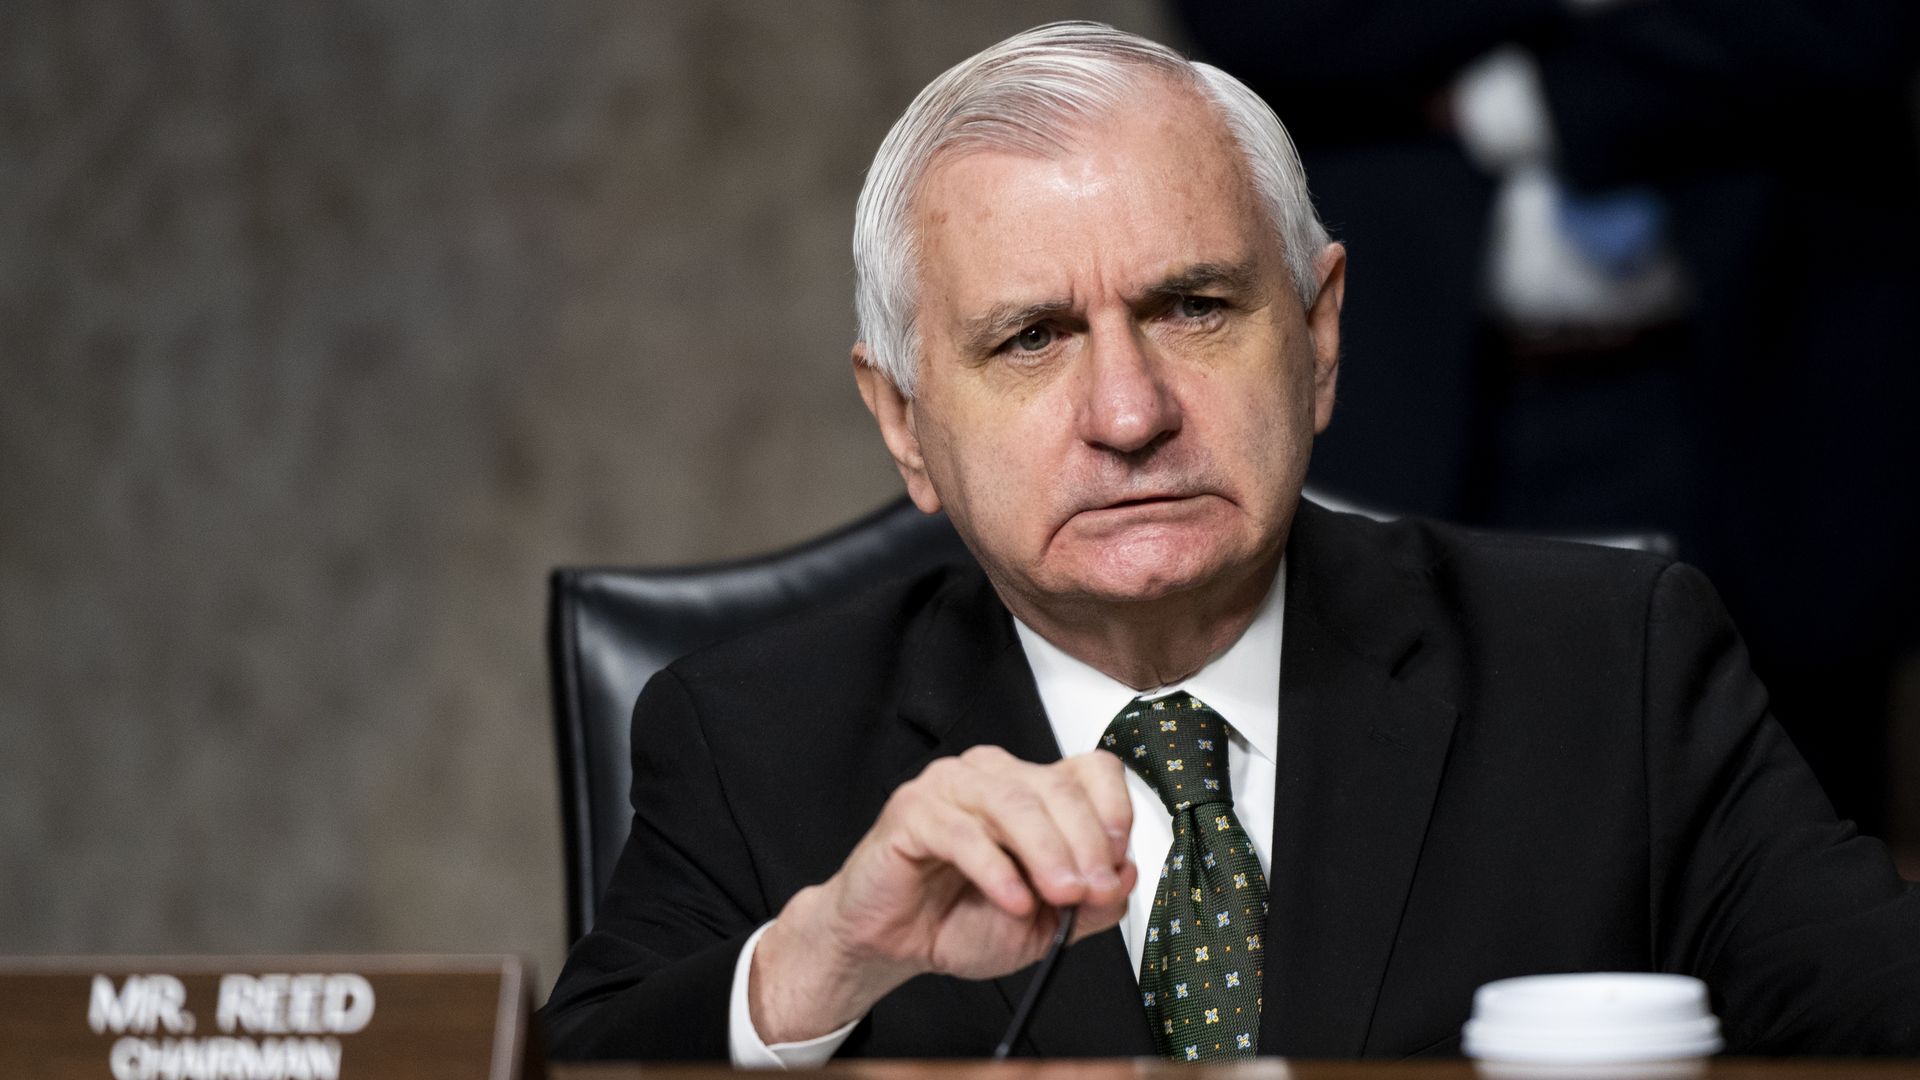 Sen. Jack Reed, D-R.I., at a Senate Armed Services Committee hearing on Tuesday, May 18